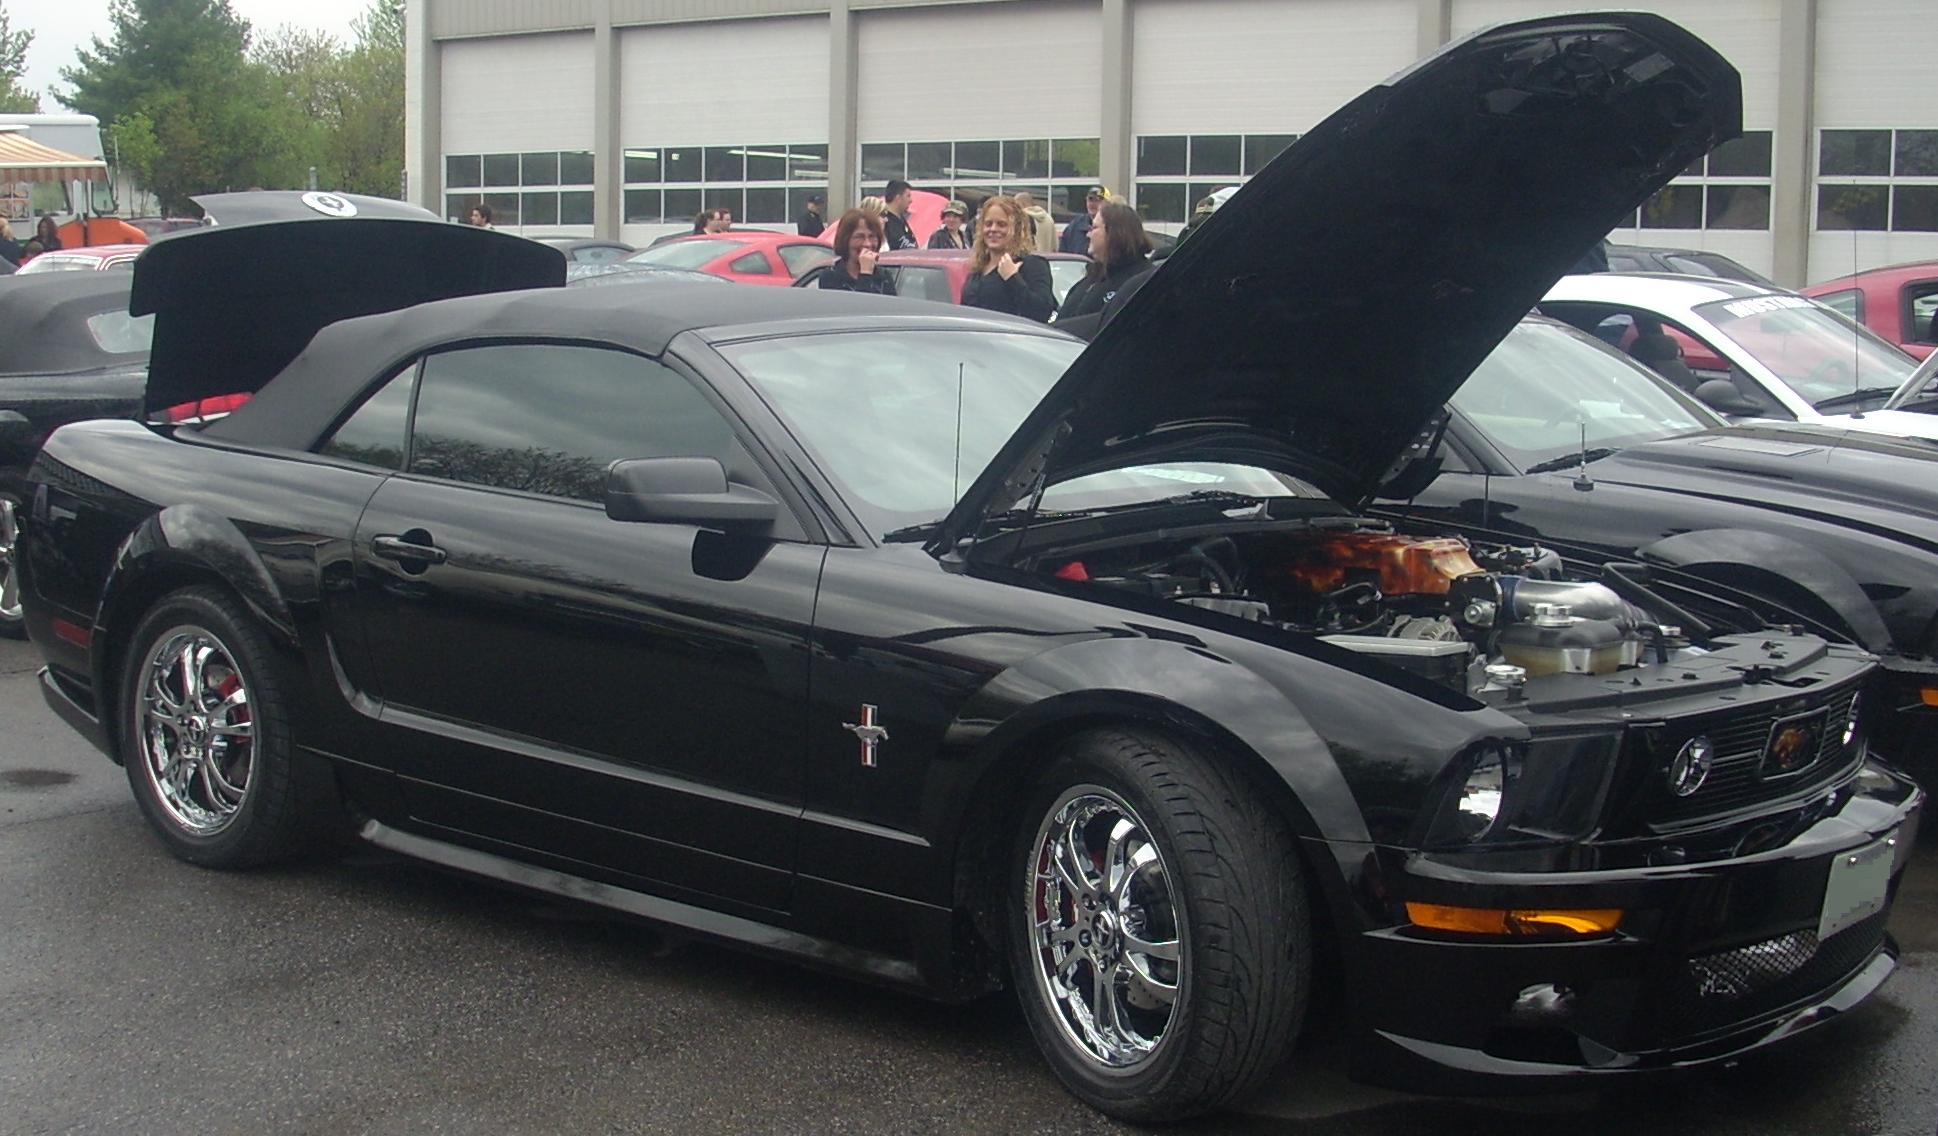 File:Modded '05-'09 Ford Mustang Pony Convertible (Sterling Ford).jpg ...